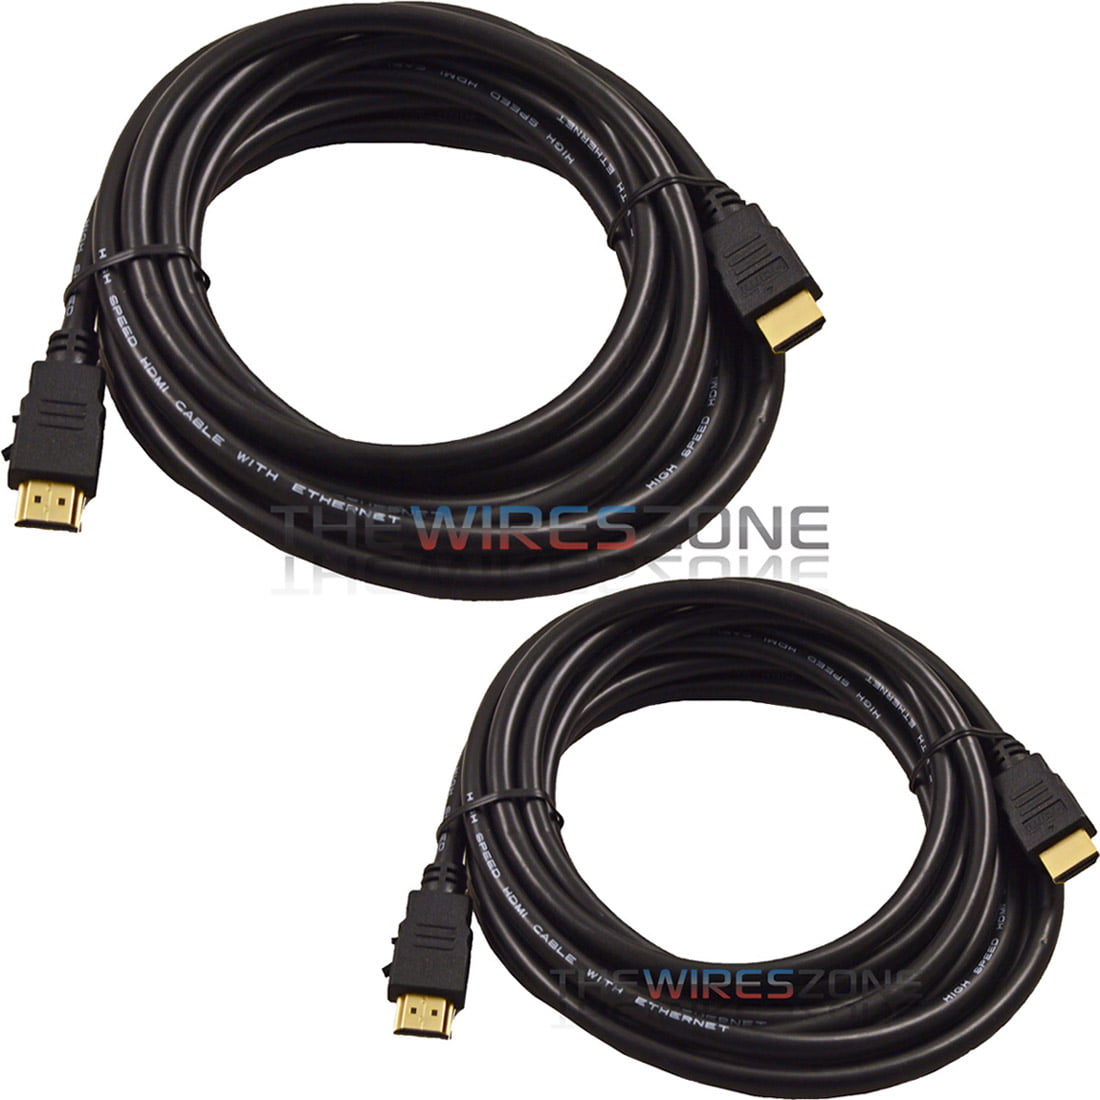 Ultra HDMI v1.4 Cable Swivel Heads with Ethernet rotating Gold ends 1m 2m 3m 5m 